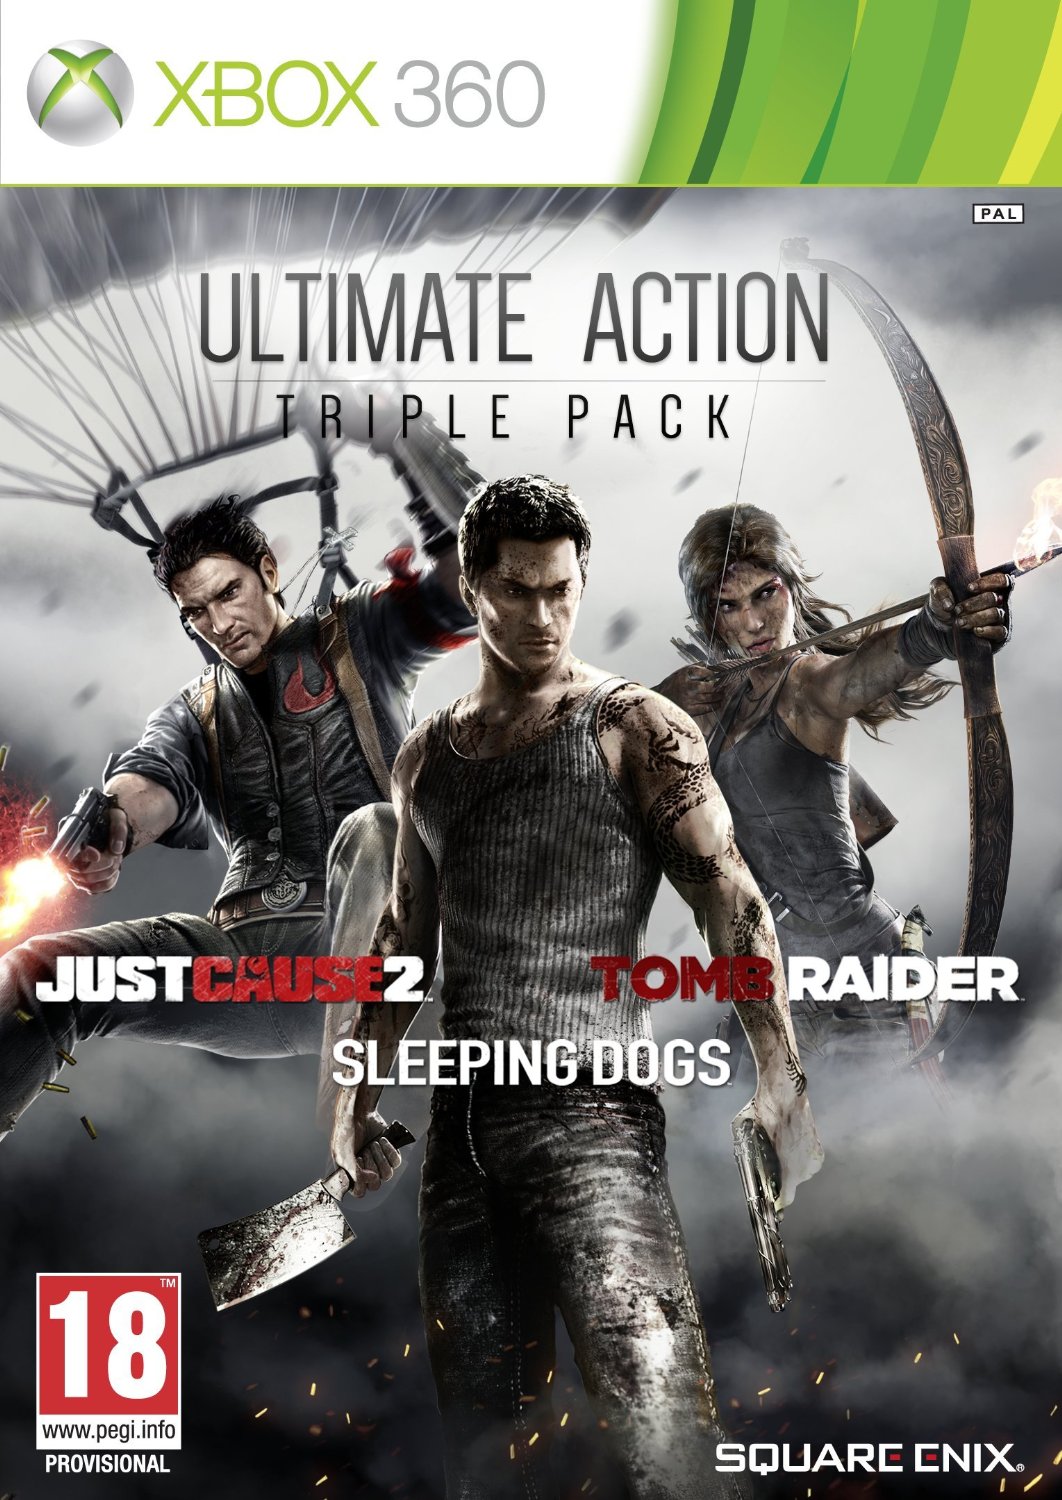 Ultimate Action Triple Pack for XBOX360 to buy